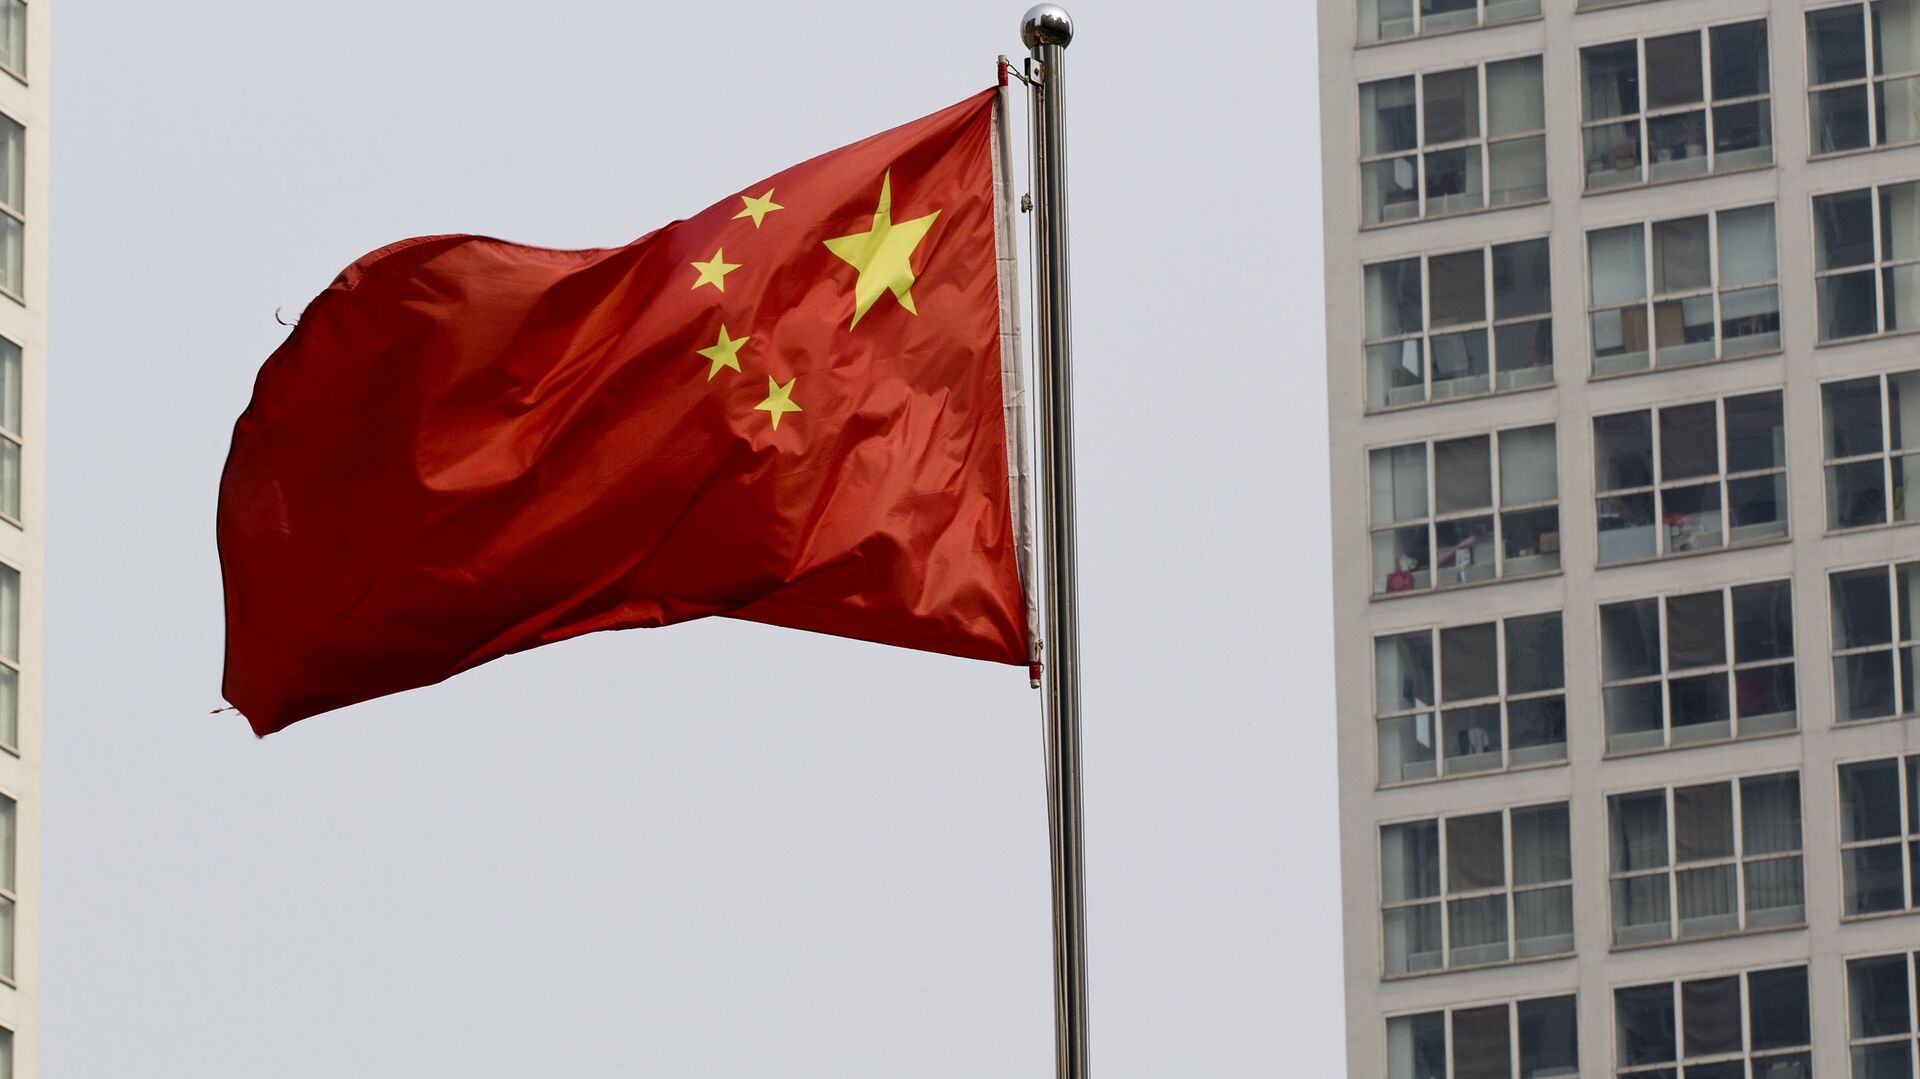 A Chinese national flag flutters in the wind in between a high-rise residential and office complex in Beijing, China. (File) - Sputnik Moldova, 1920, 07.05.2022